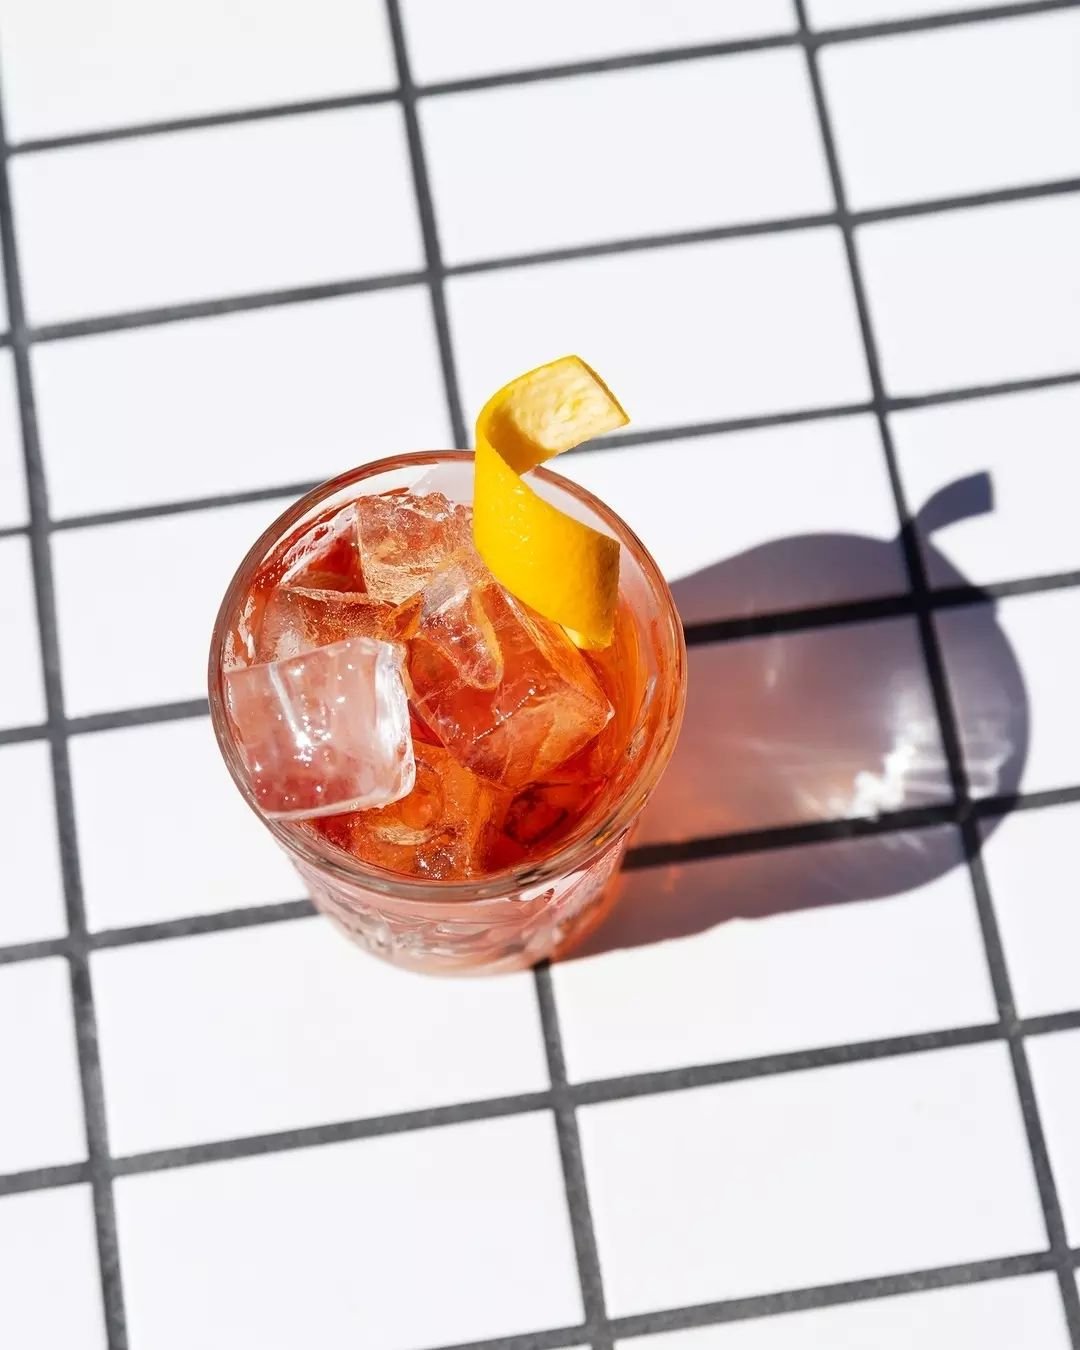 &ldquo;One is not enough, two is perfect, and three is just too many.&rdquo; - Stanley Tucci on Negronis